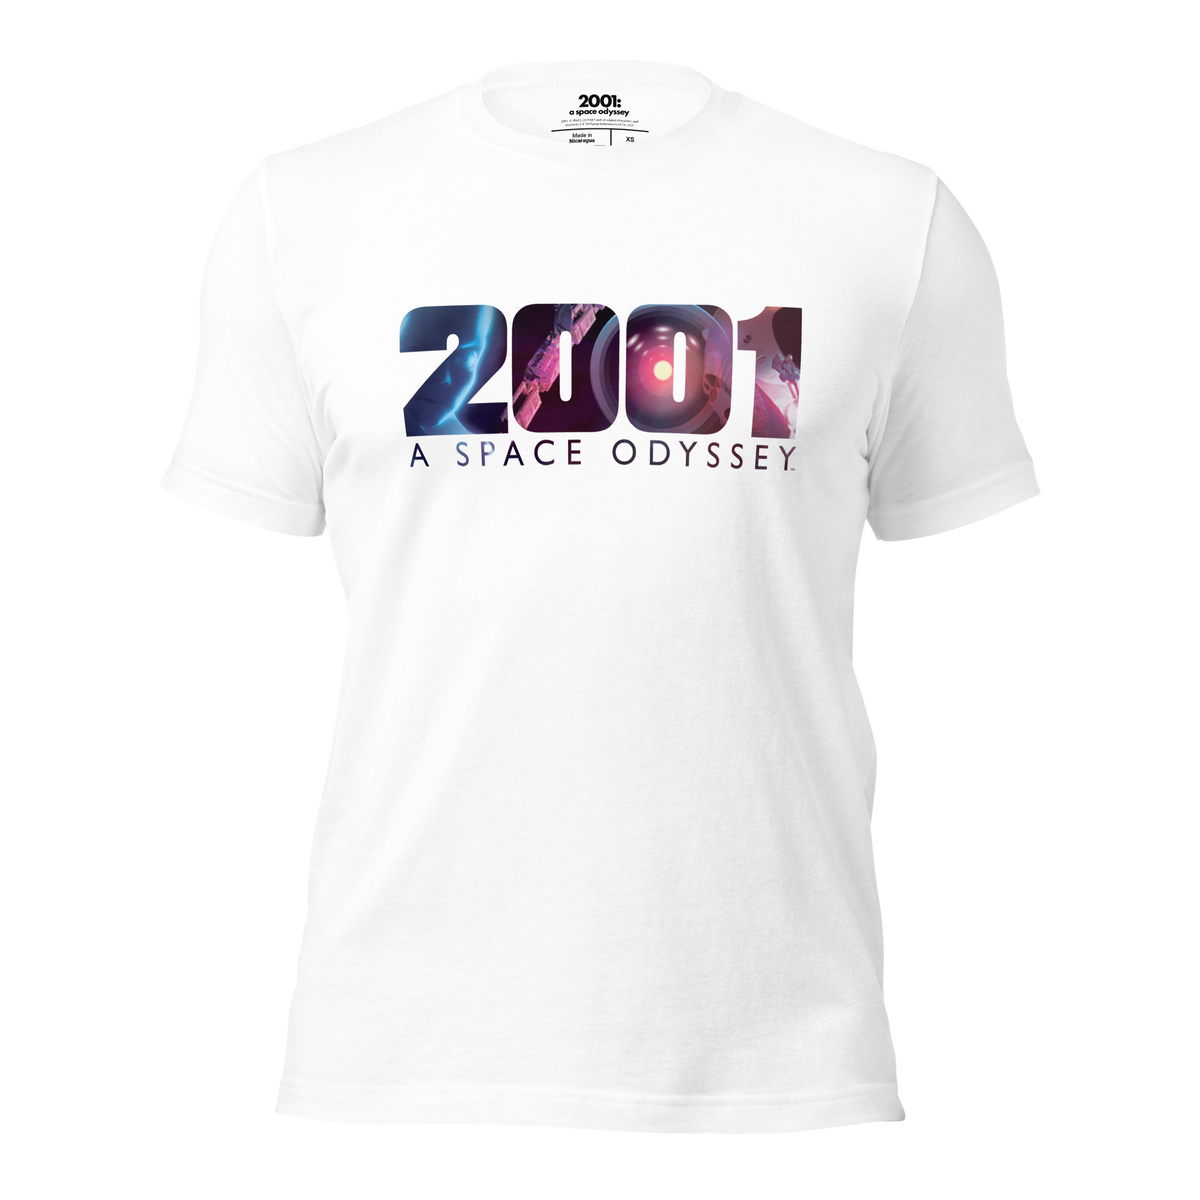 2001: A Space Odyssey - Space Title Treatment - White T-Shirt